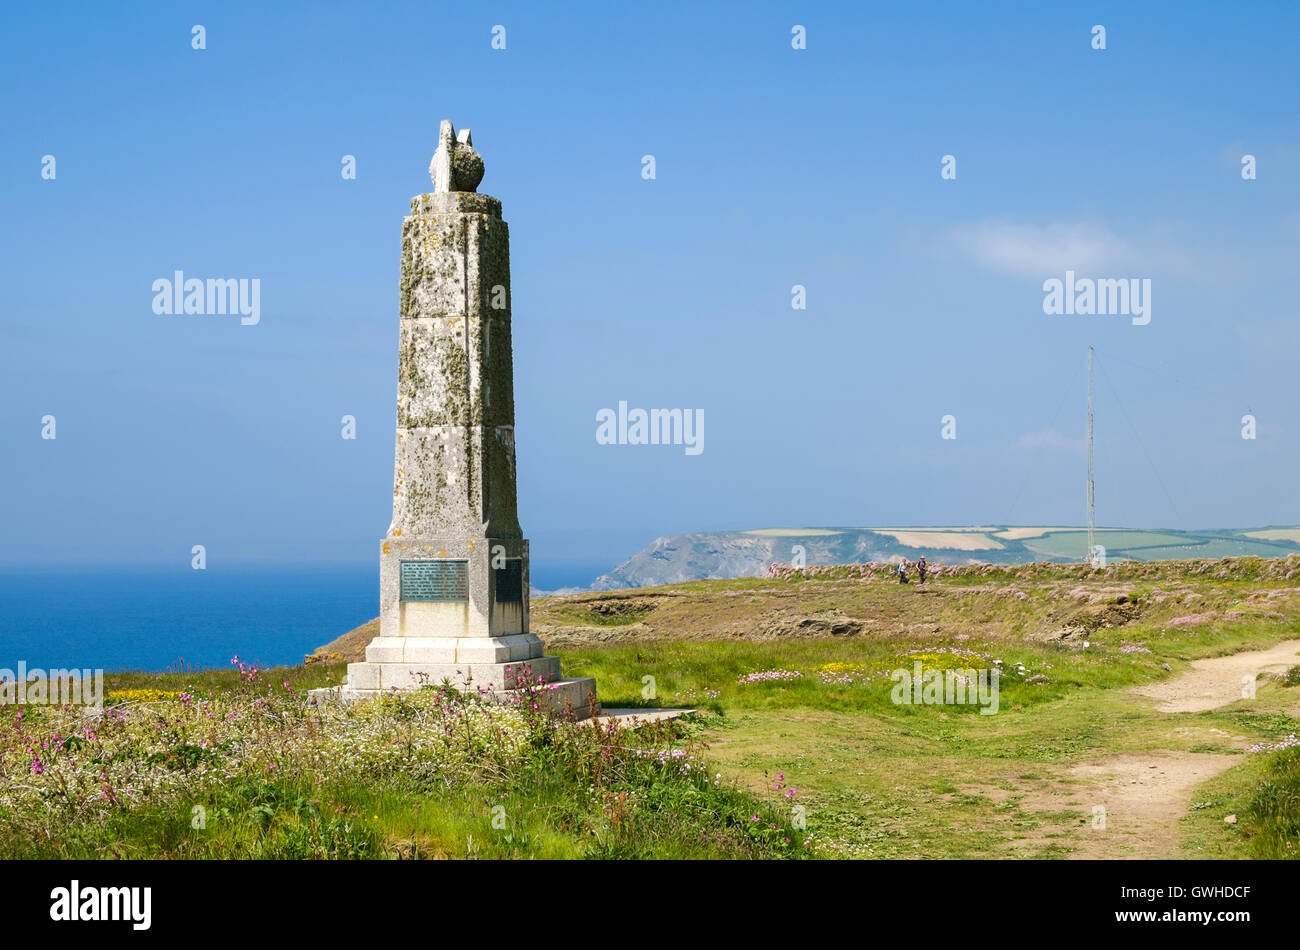 Marconi monument to Guglielmo Marconi in Poldhu, Cornwall, England UK, site of the first transatlantic radio transmission in 1901 Stock Photo